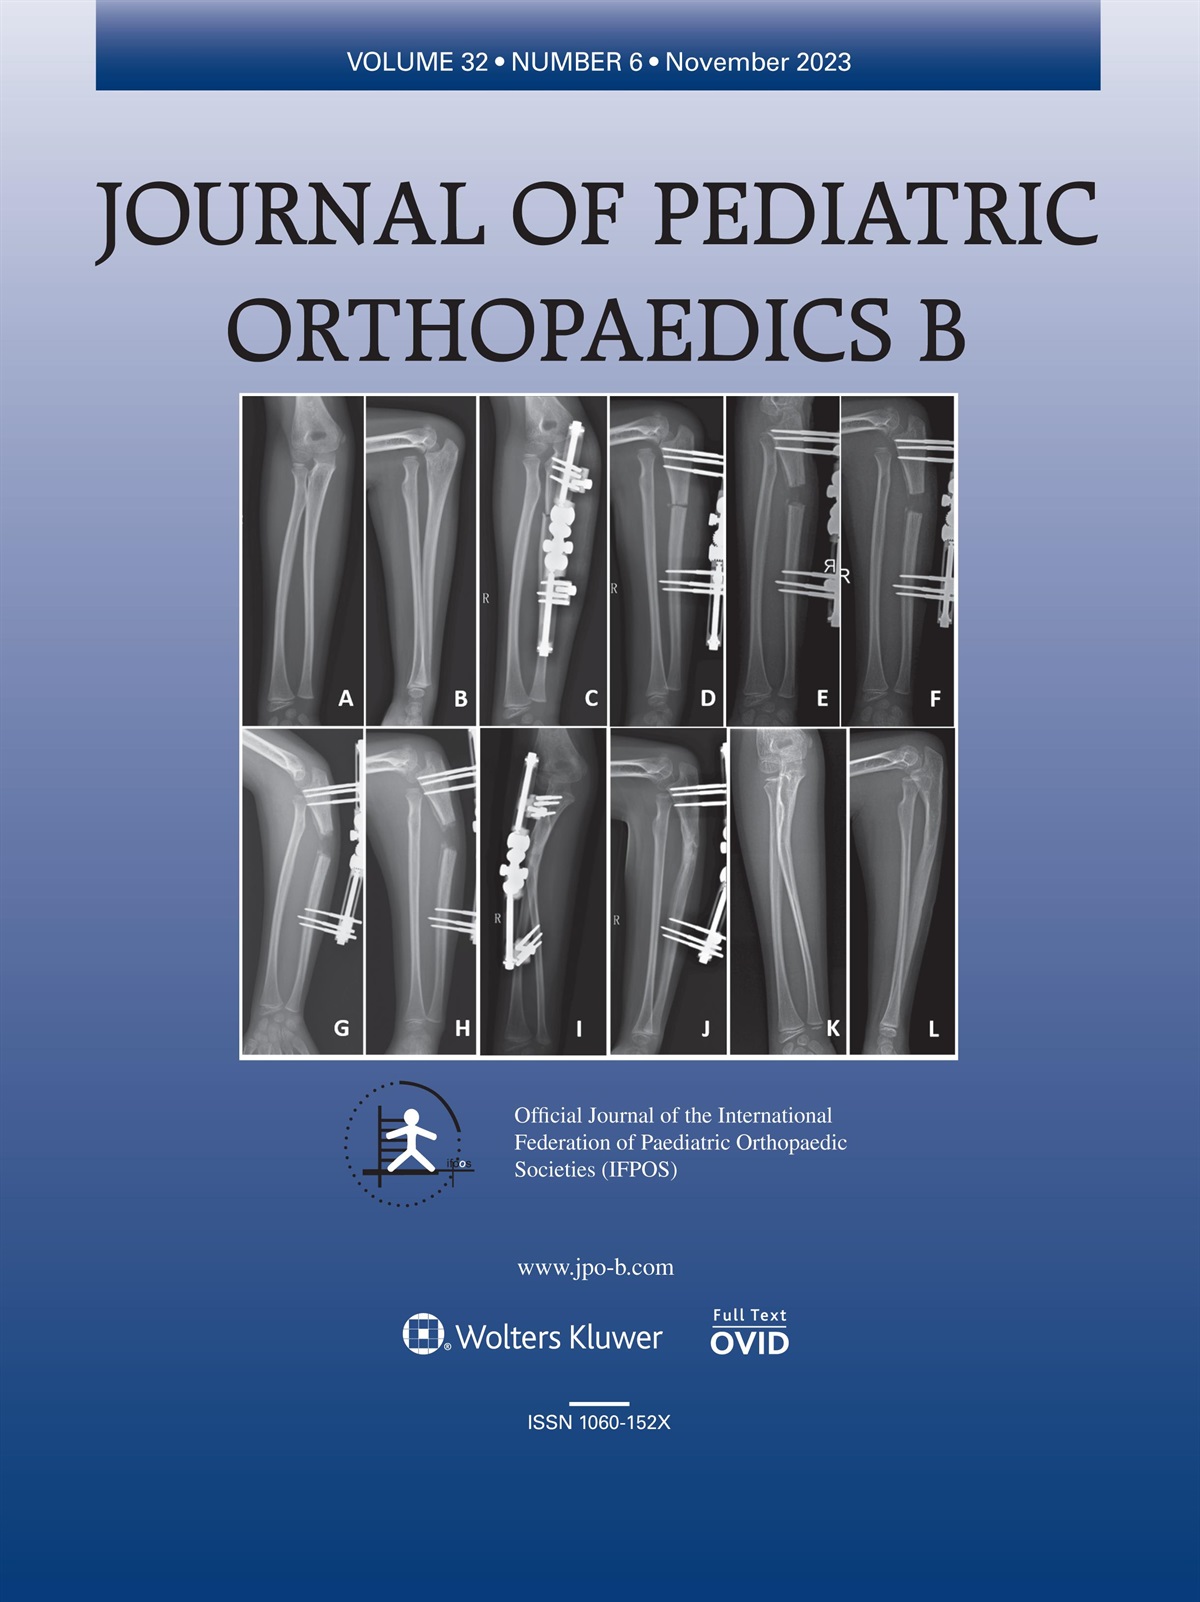 Comment on ‘Which pediatric supracondylar humerus fractures are high risk for conversion to open reduction?’